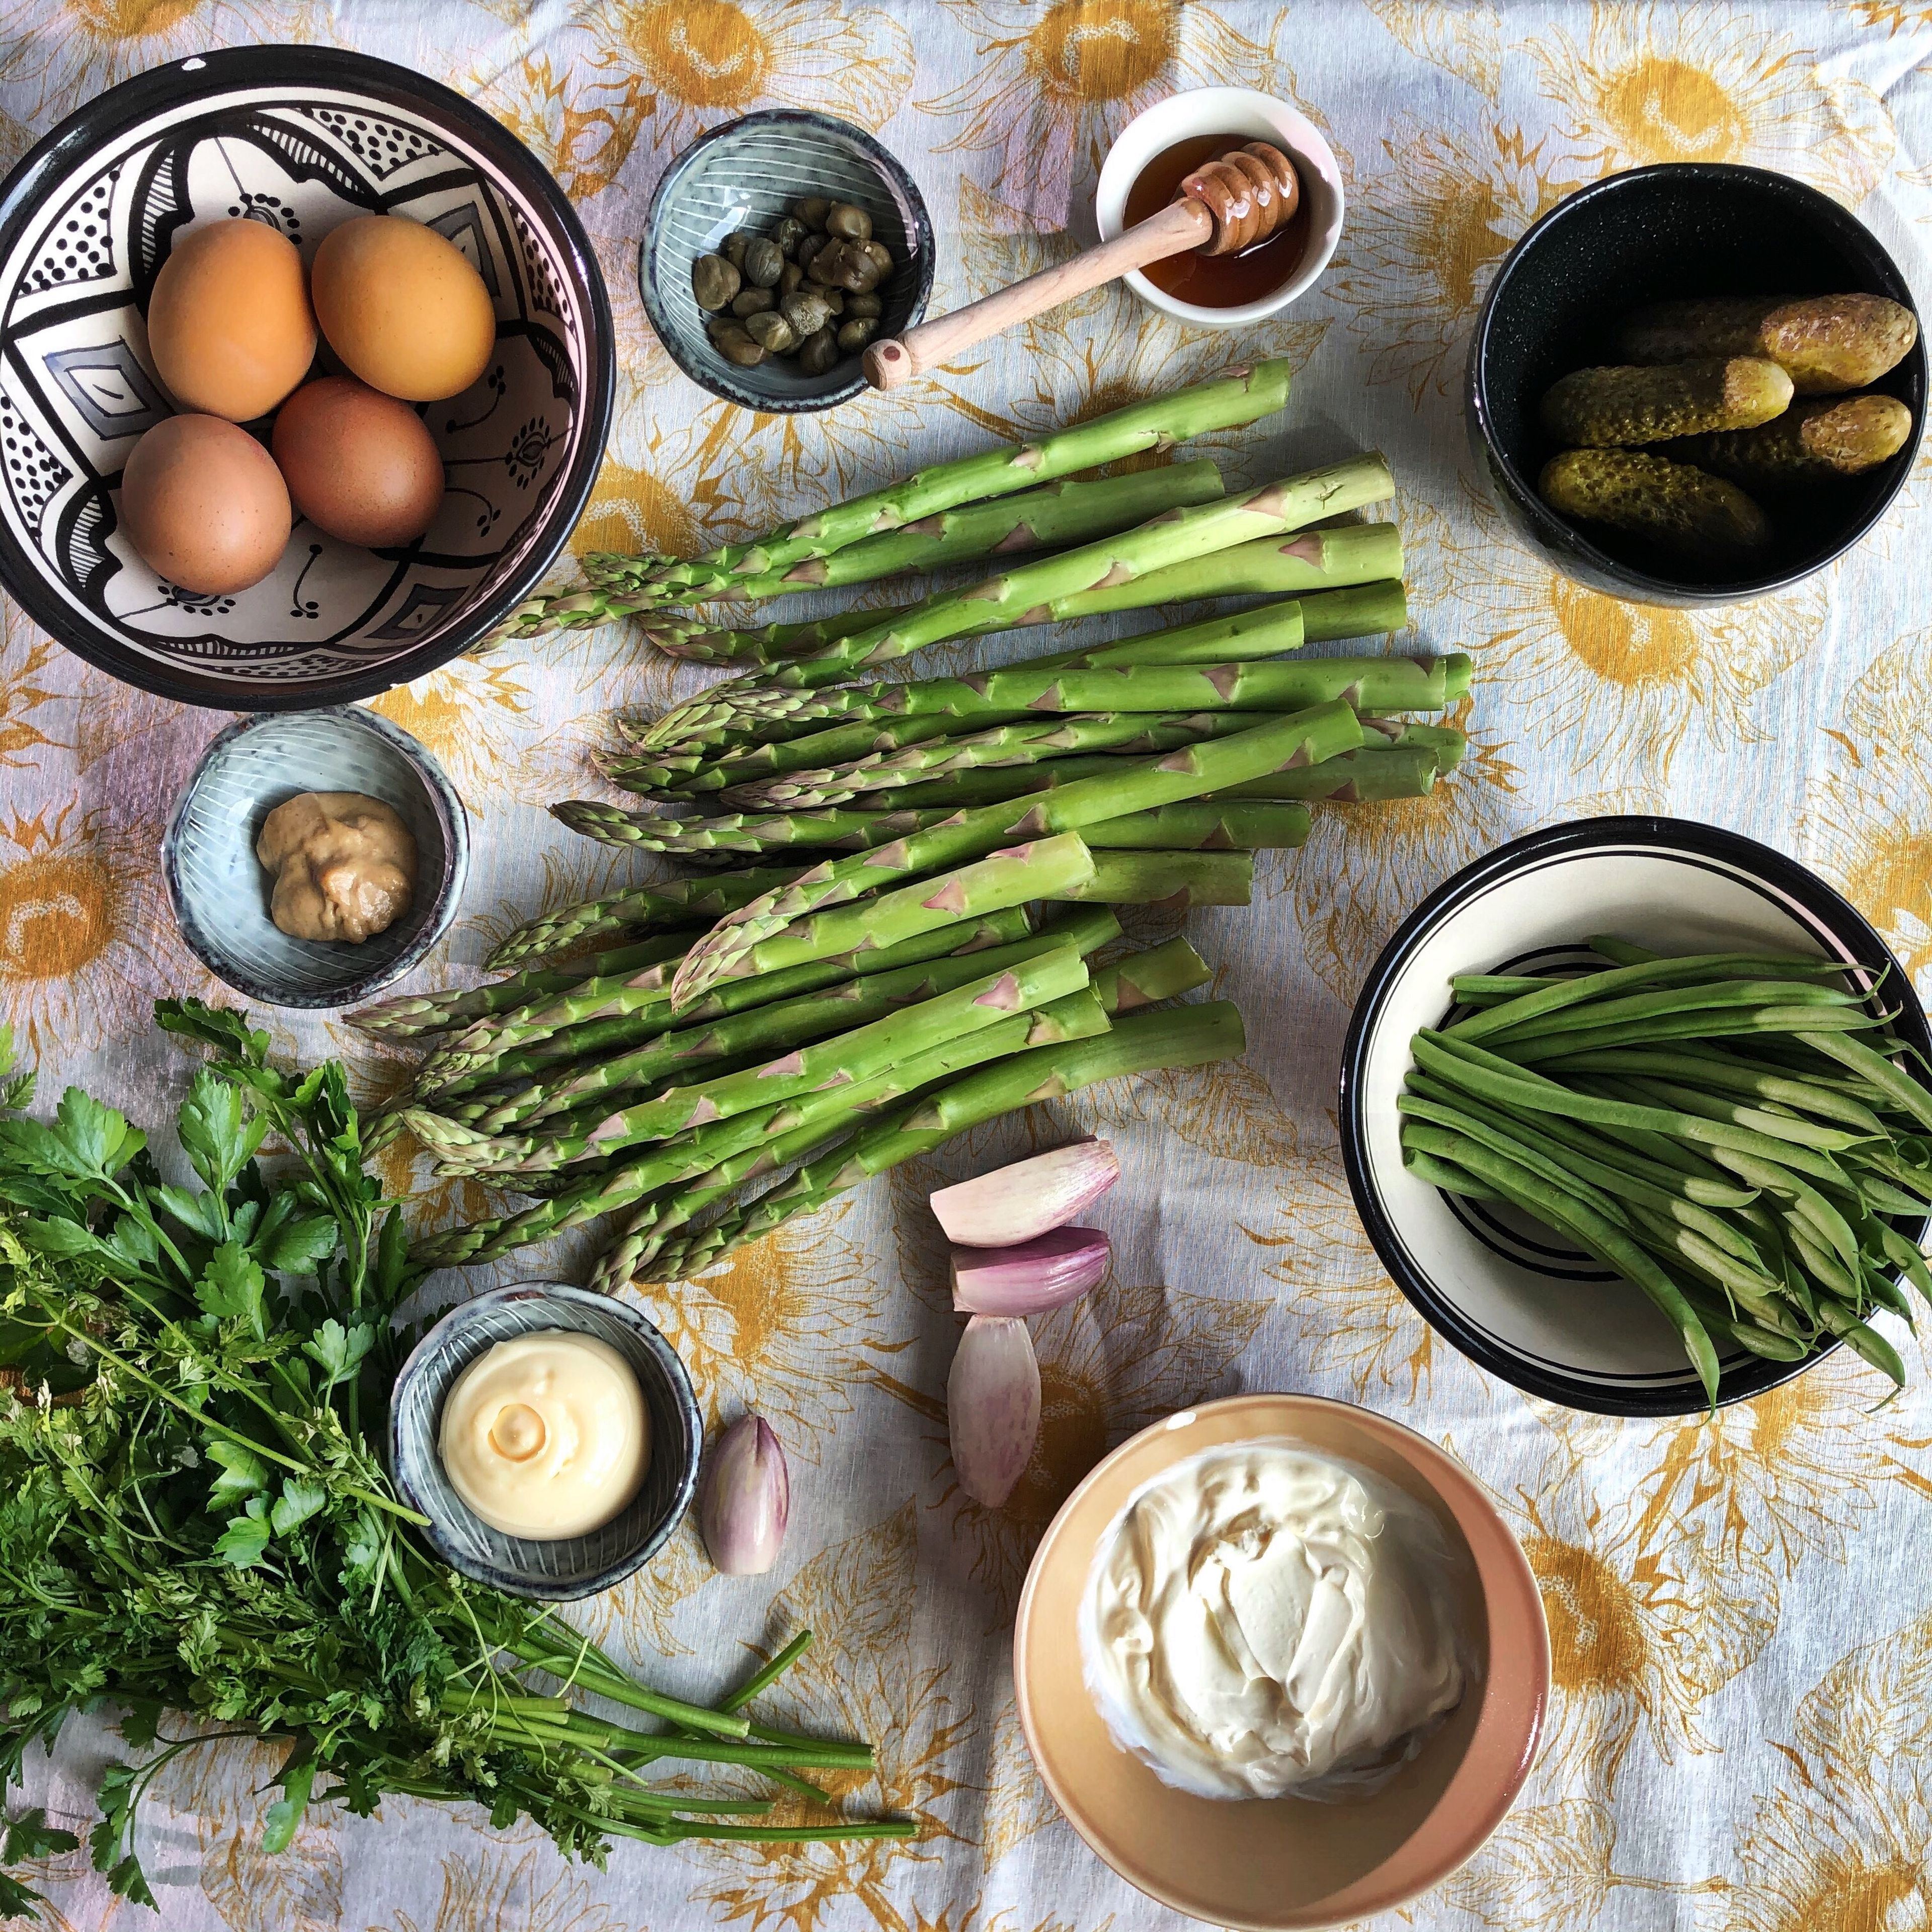 Weigh all ingredients. Cut the ends off the asparagus. Peel the shallots and peel the eggs.